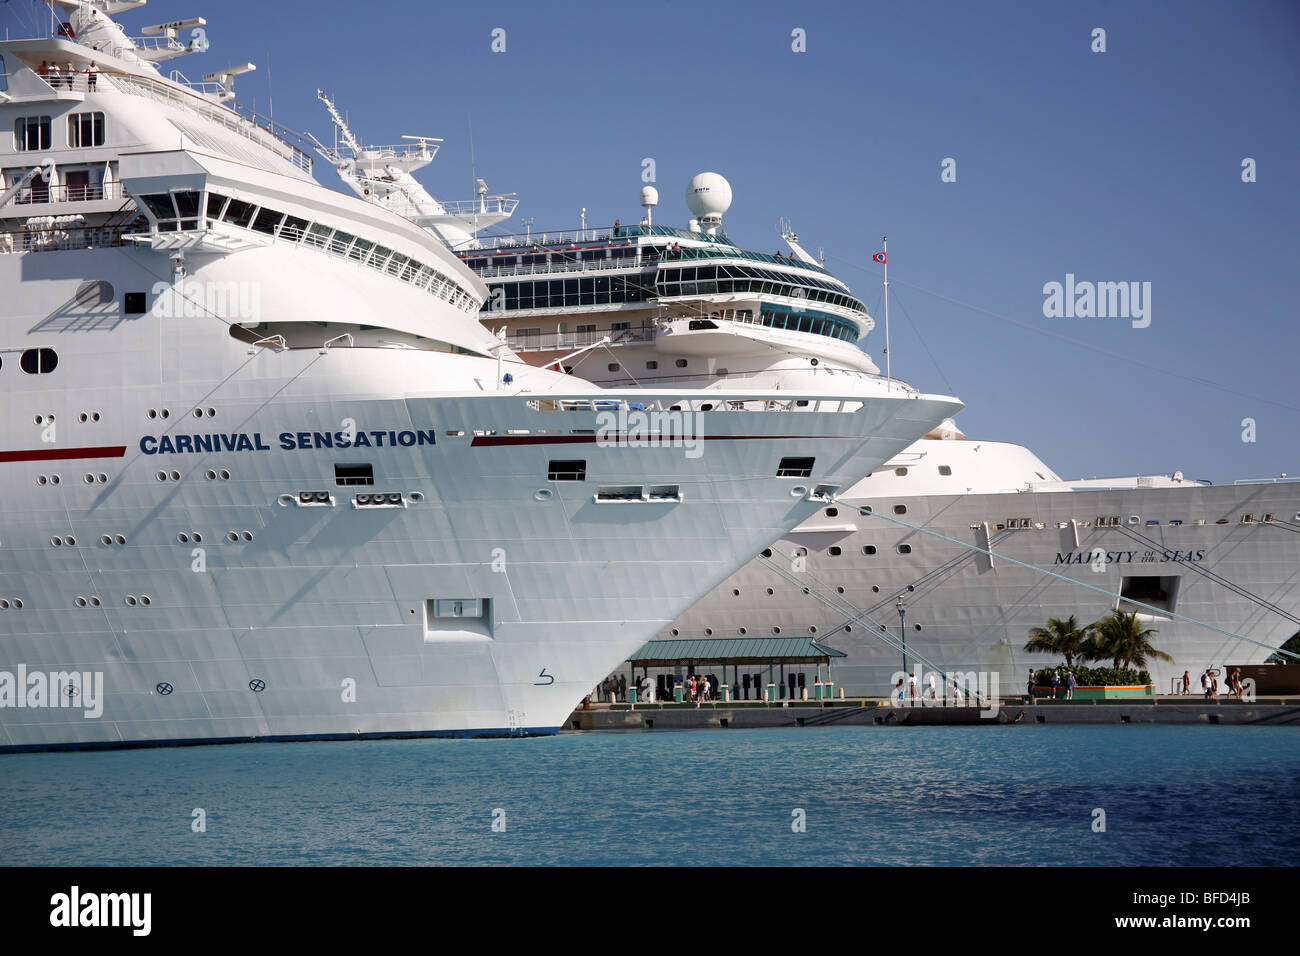 The Carnival Sensation and Majesty of the Seas cruise ship in Nassau Harbour, Providence Island, in the Bahamas Stock Photo